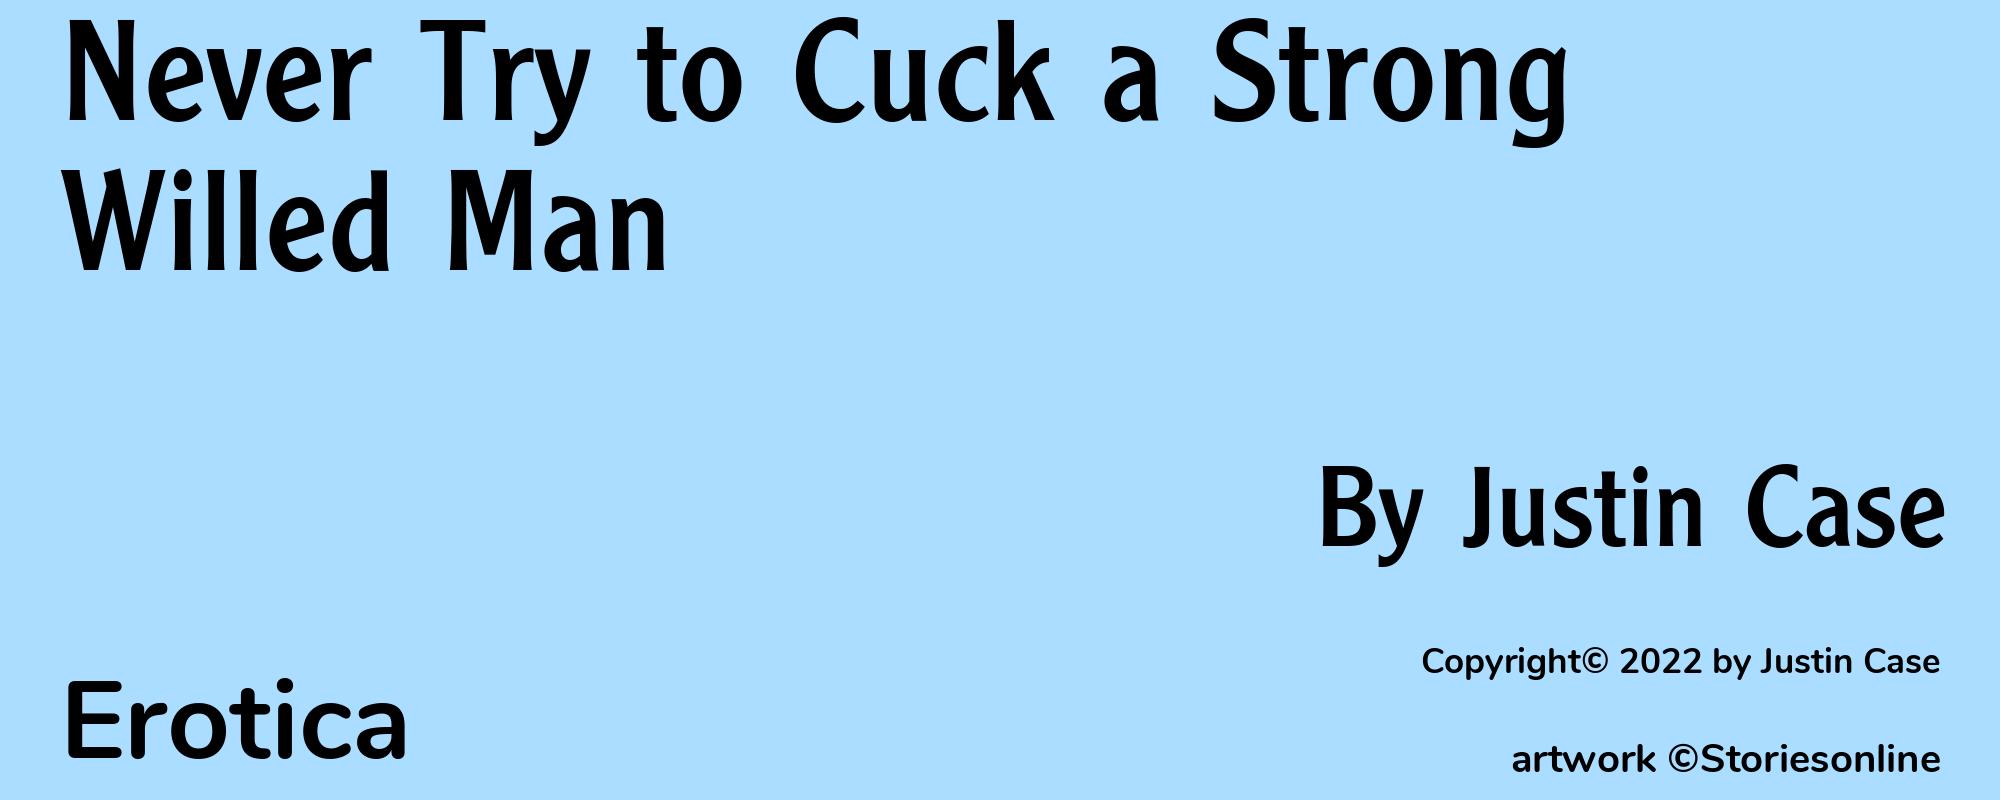 Never Try to Cuck a Strong Willed Man - Cover